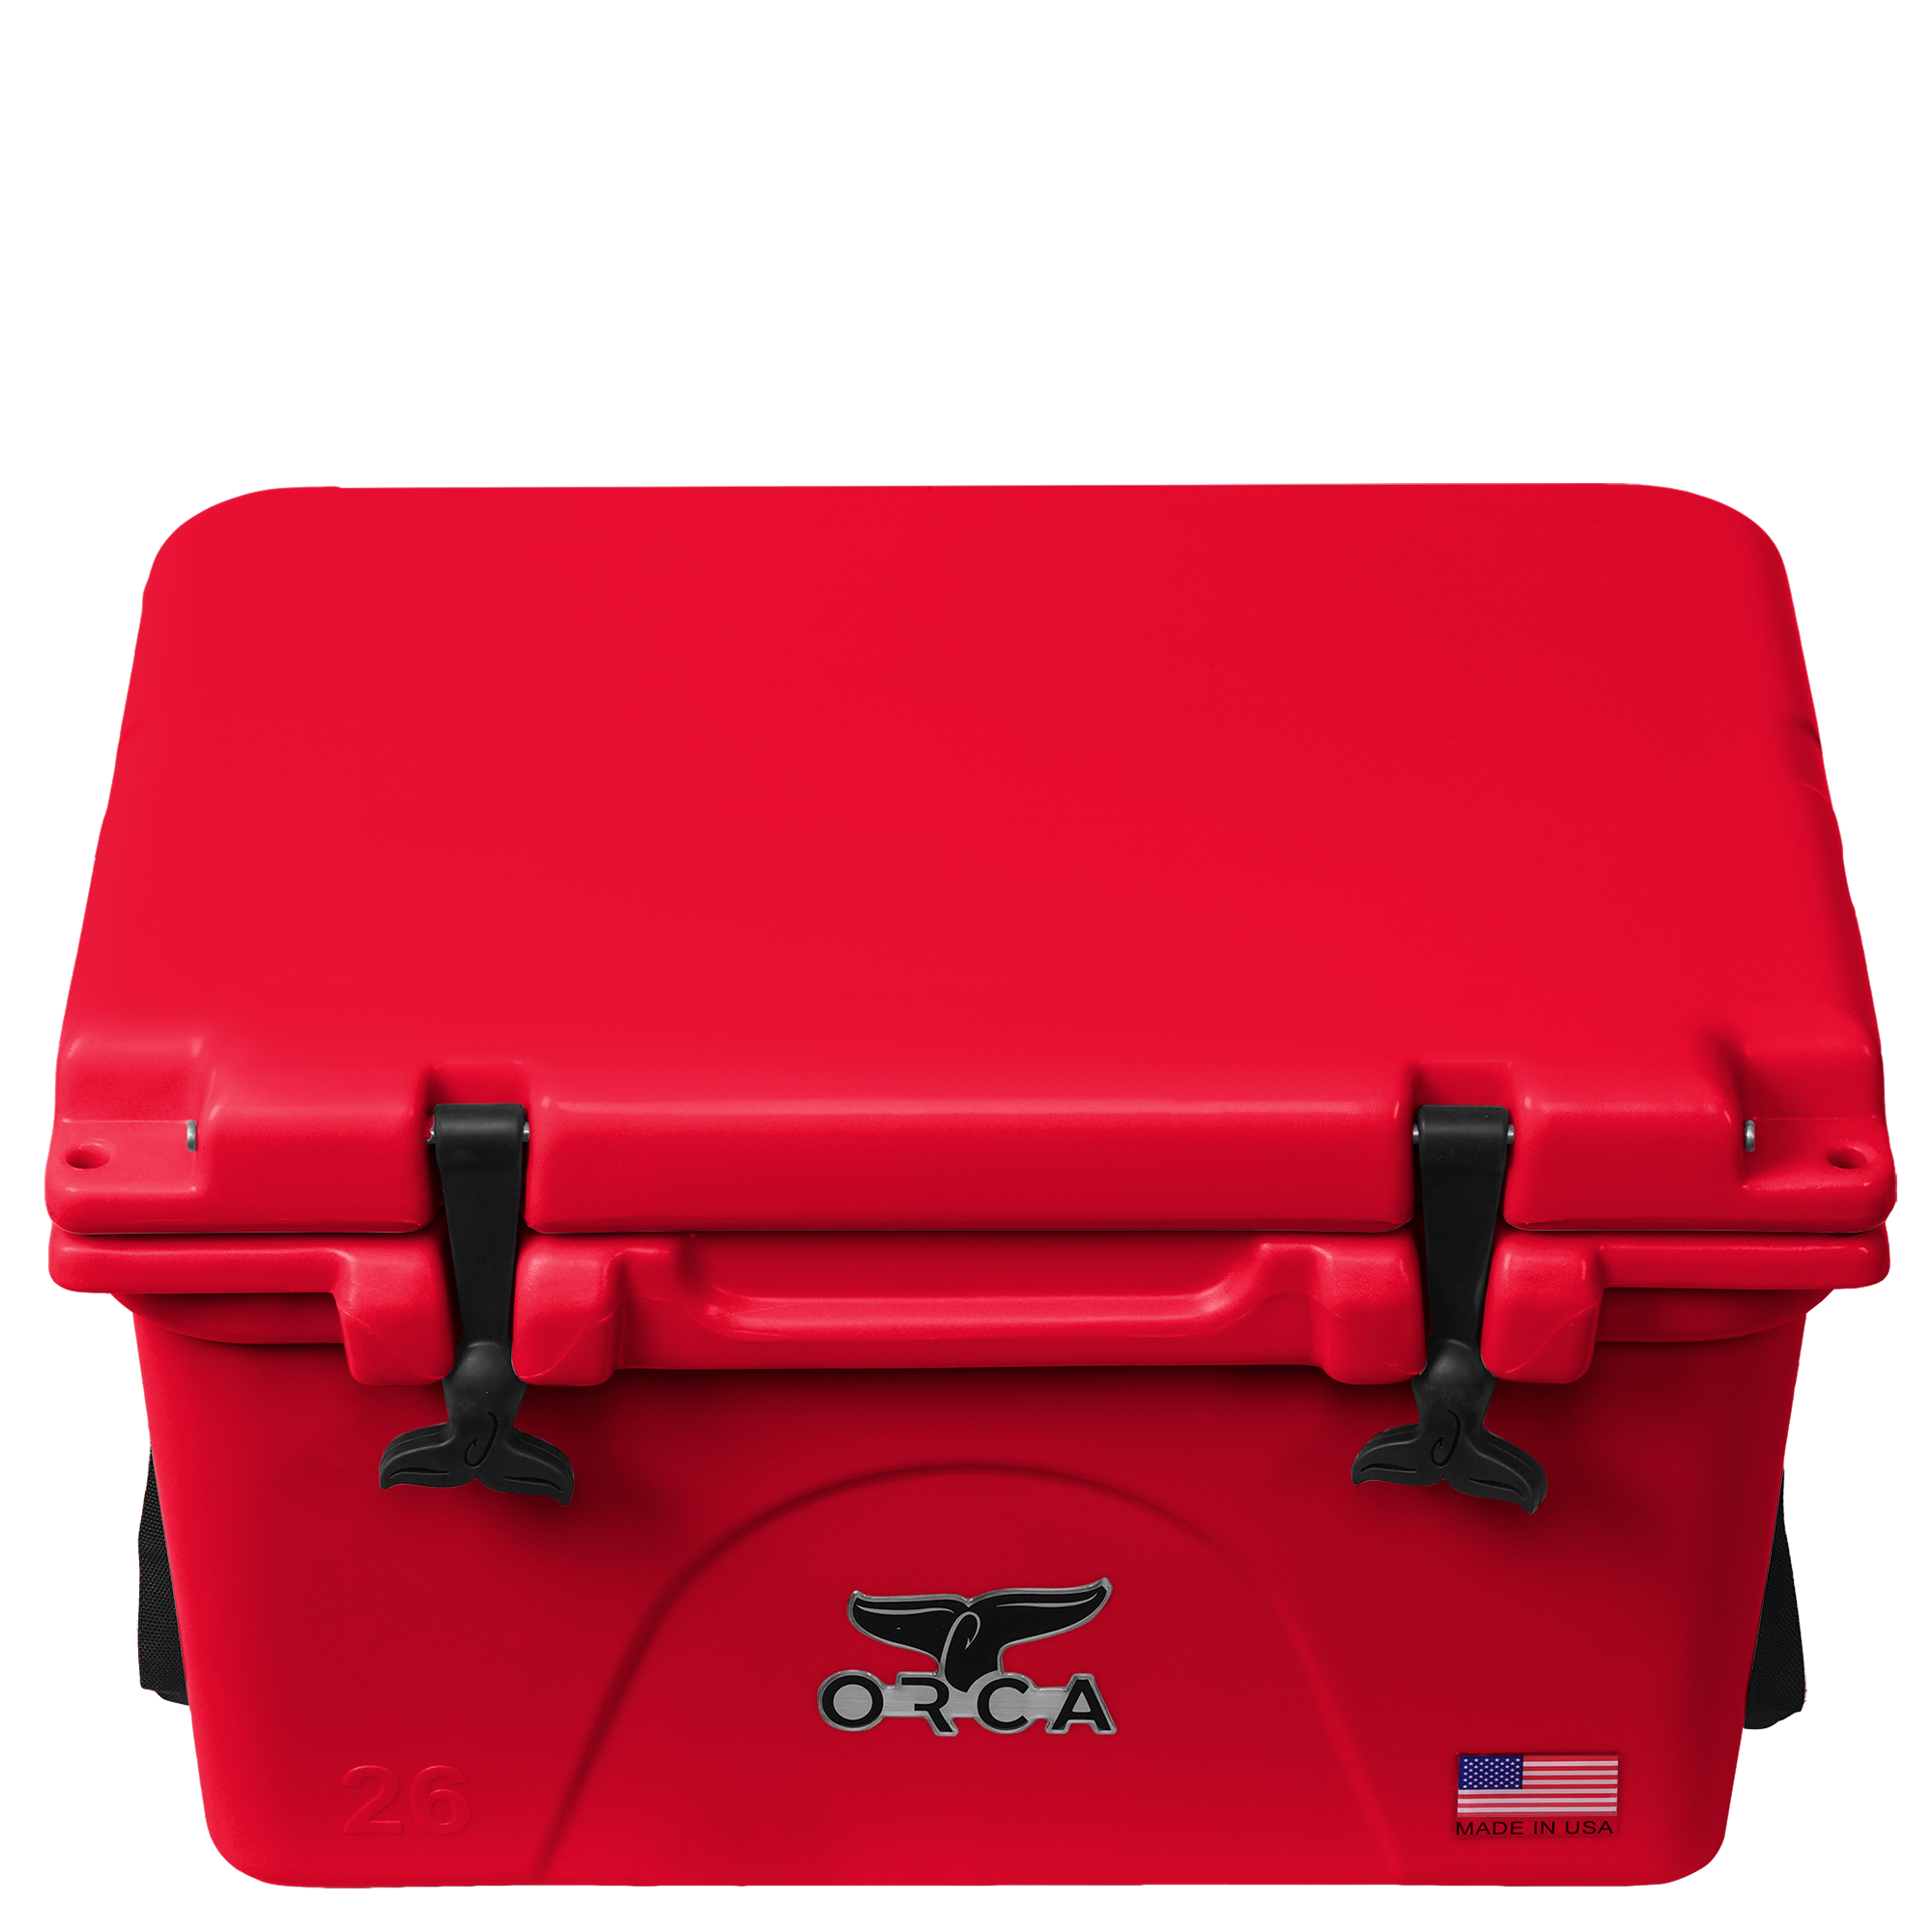 26 Quart Cooler, Red, Top Angle